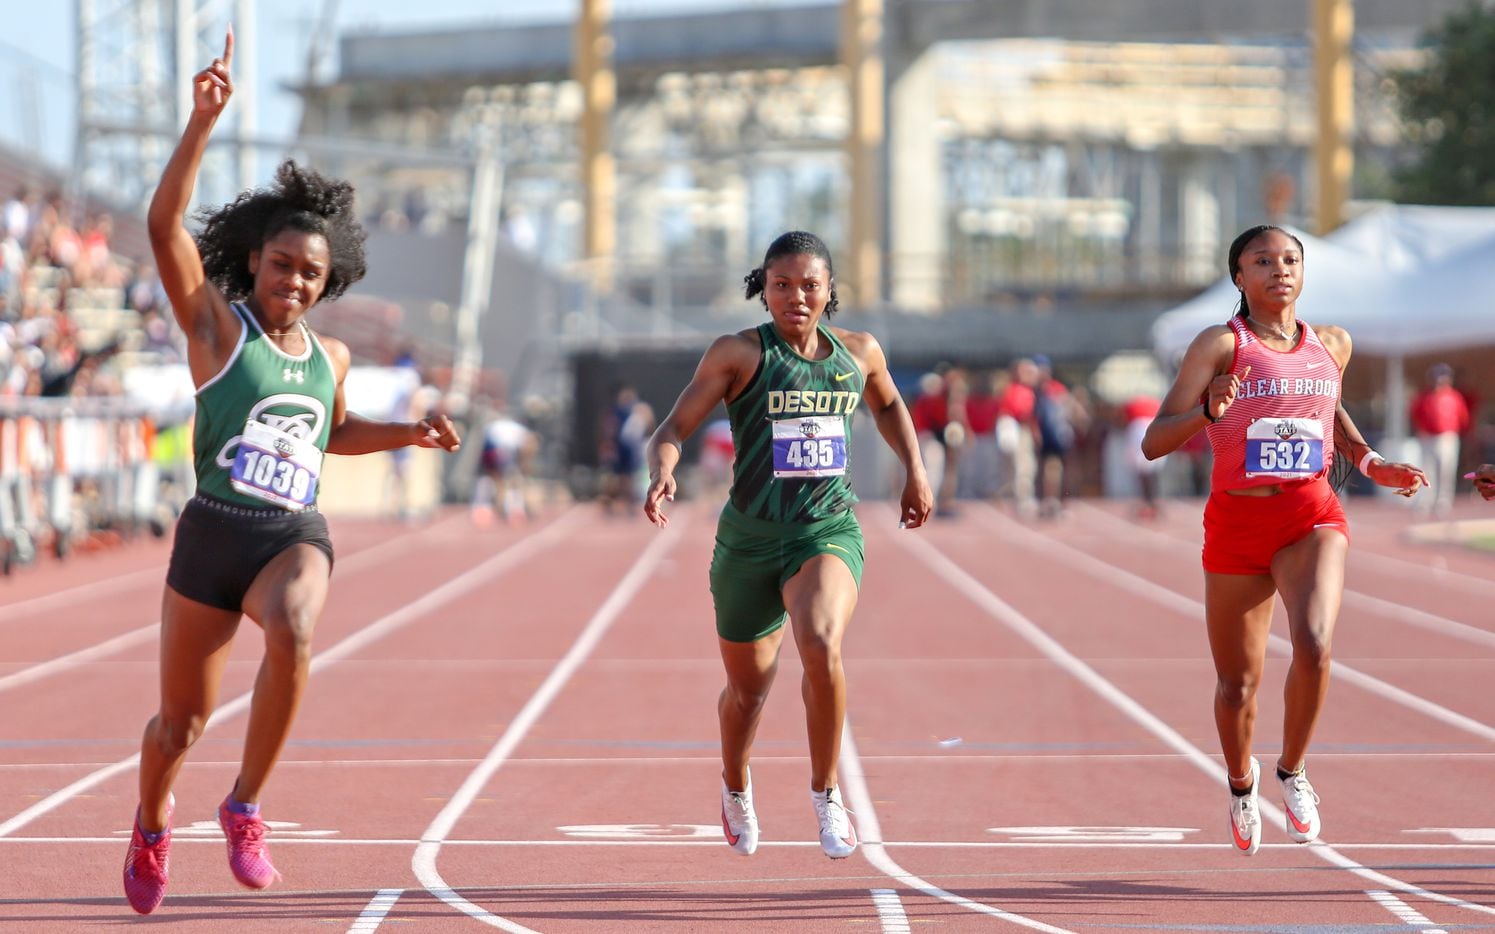 DeSoto's Ja'Era Griffin (center) places fifth during her 6A Girls 100 meter run at the UIL...